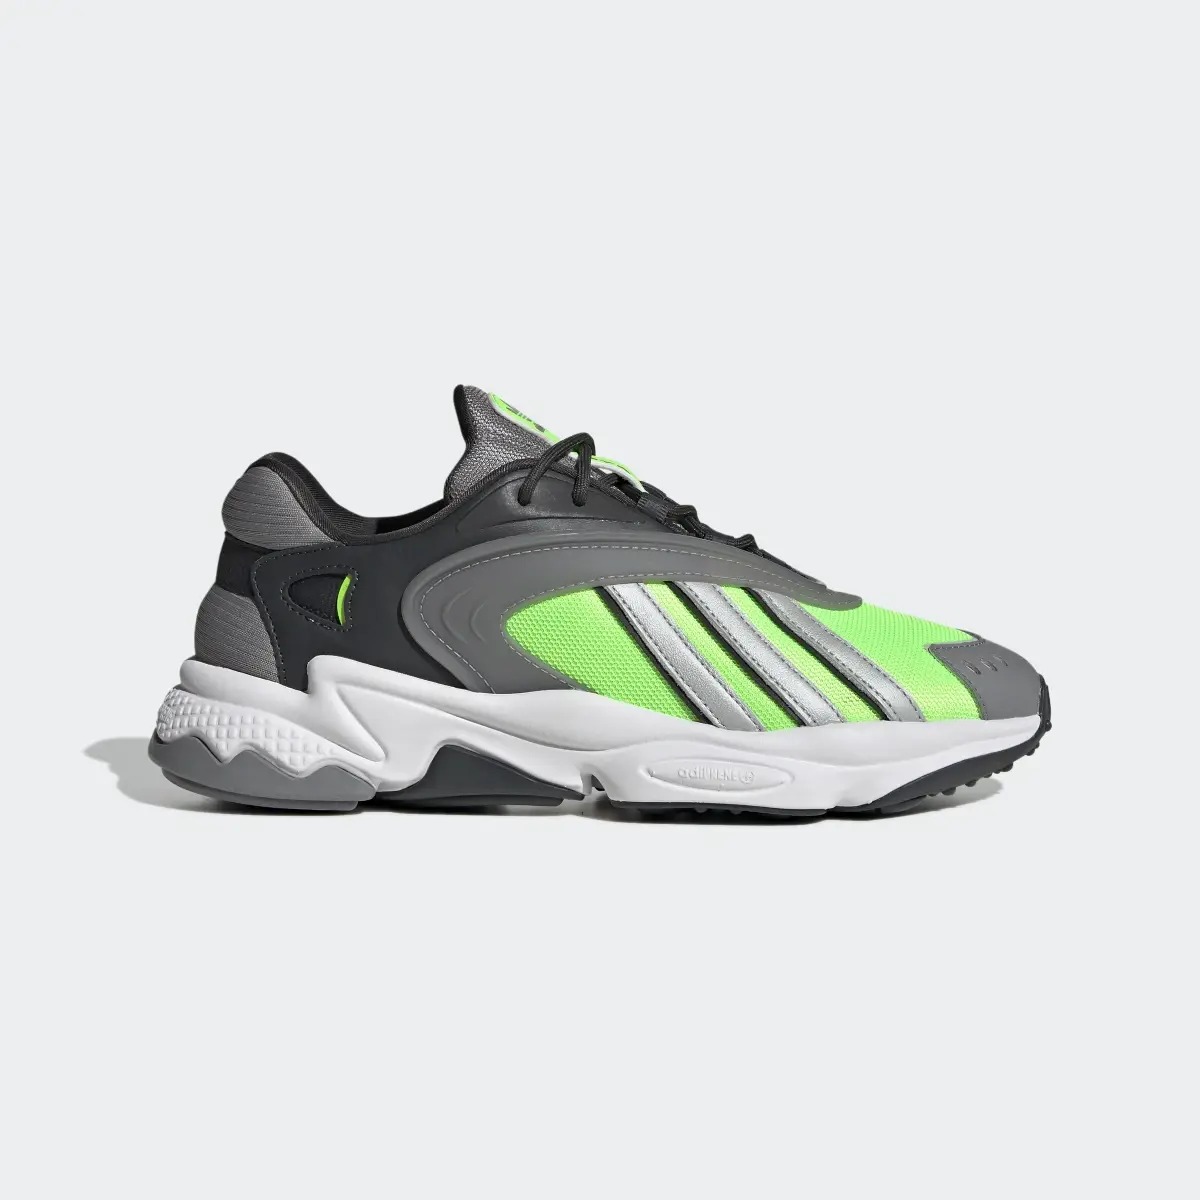 Adidas Oztral Shoes. 2